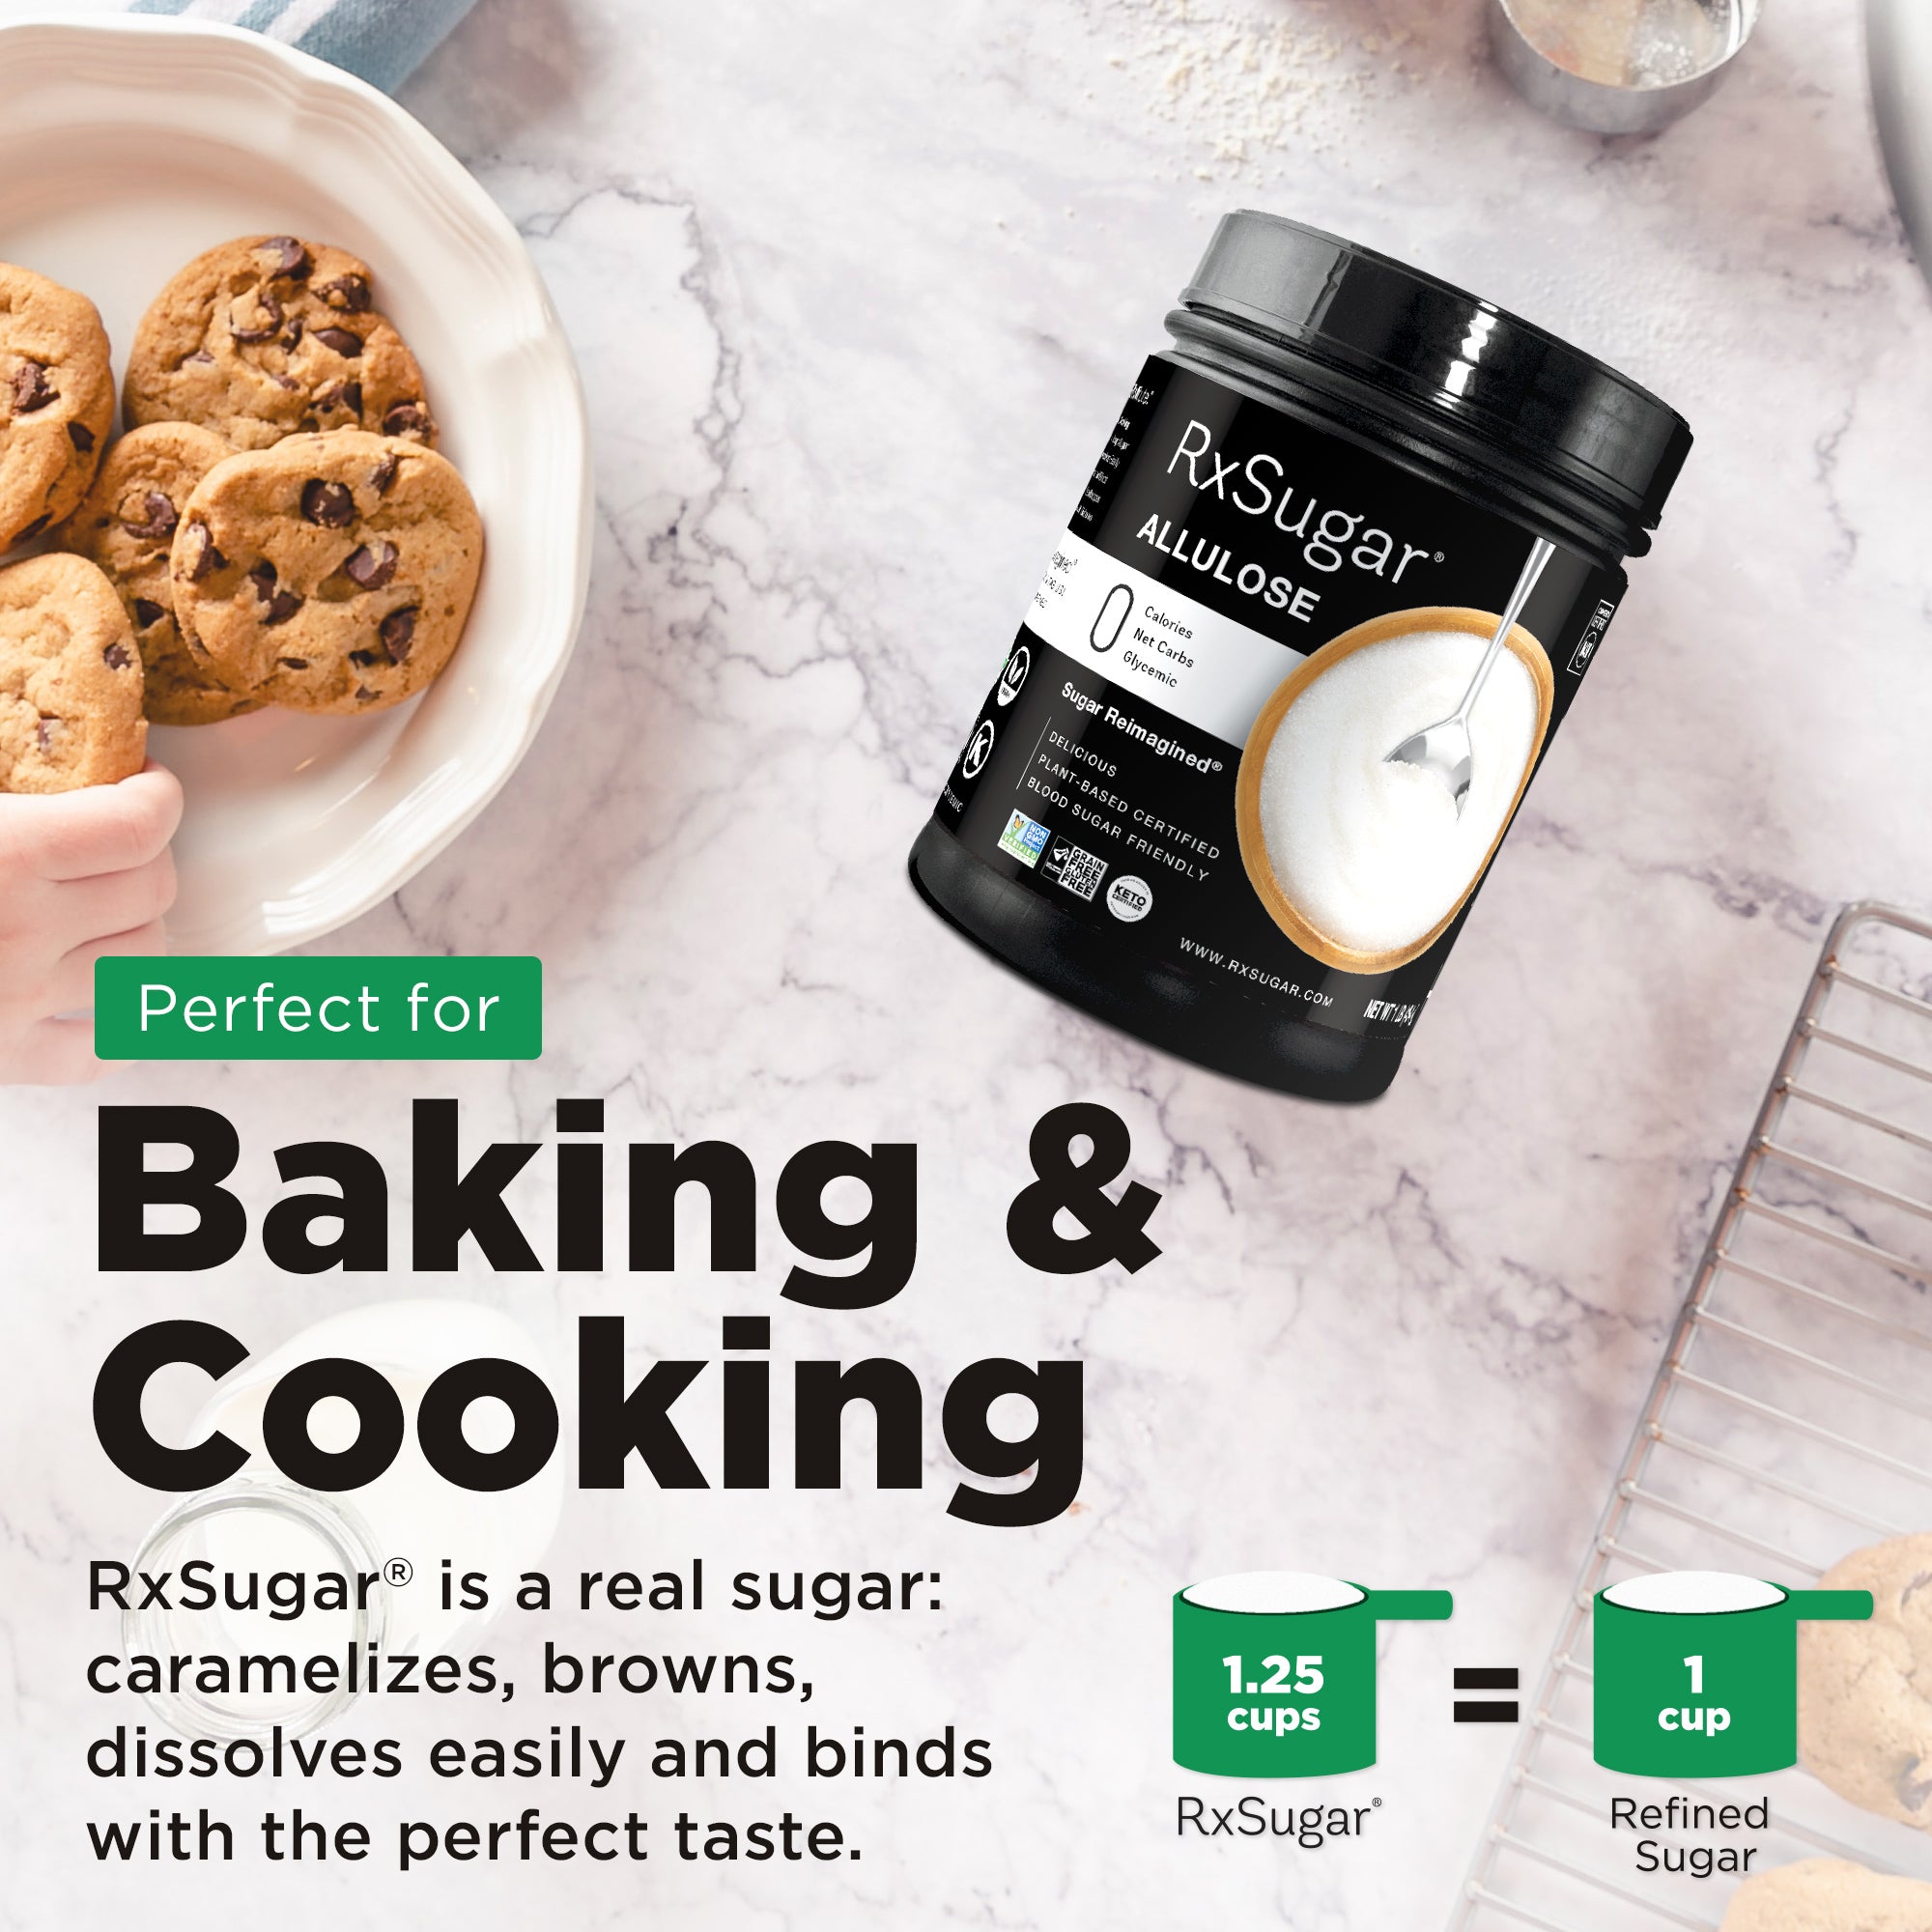 Baking and Cooking. RxSugar is a real sugar. caramelizes, browns, dissolves easily and binds with the perfect taste. RxSugar 1.25 cups to 1 cup refined sugar. Cookies on plate with RxSugar canister.